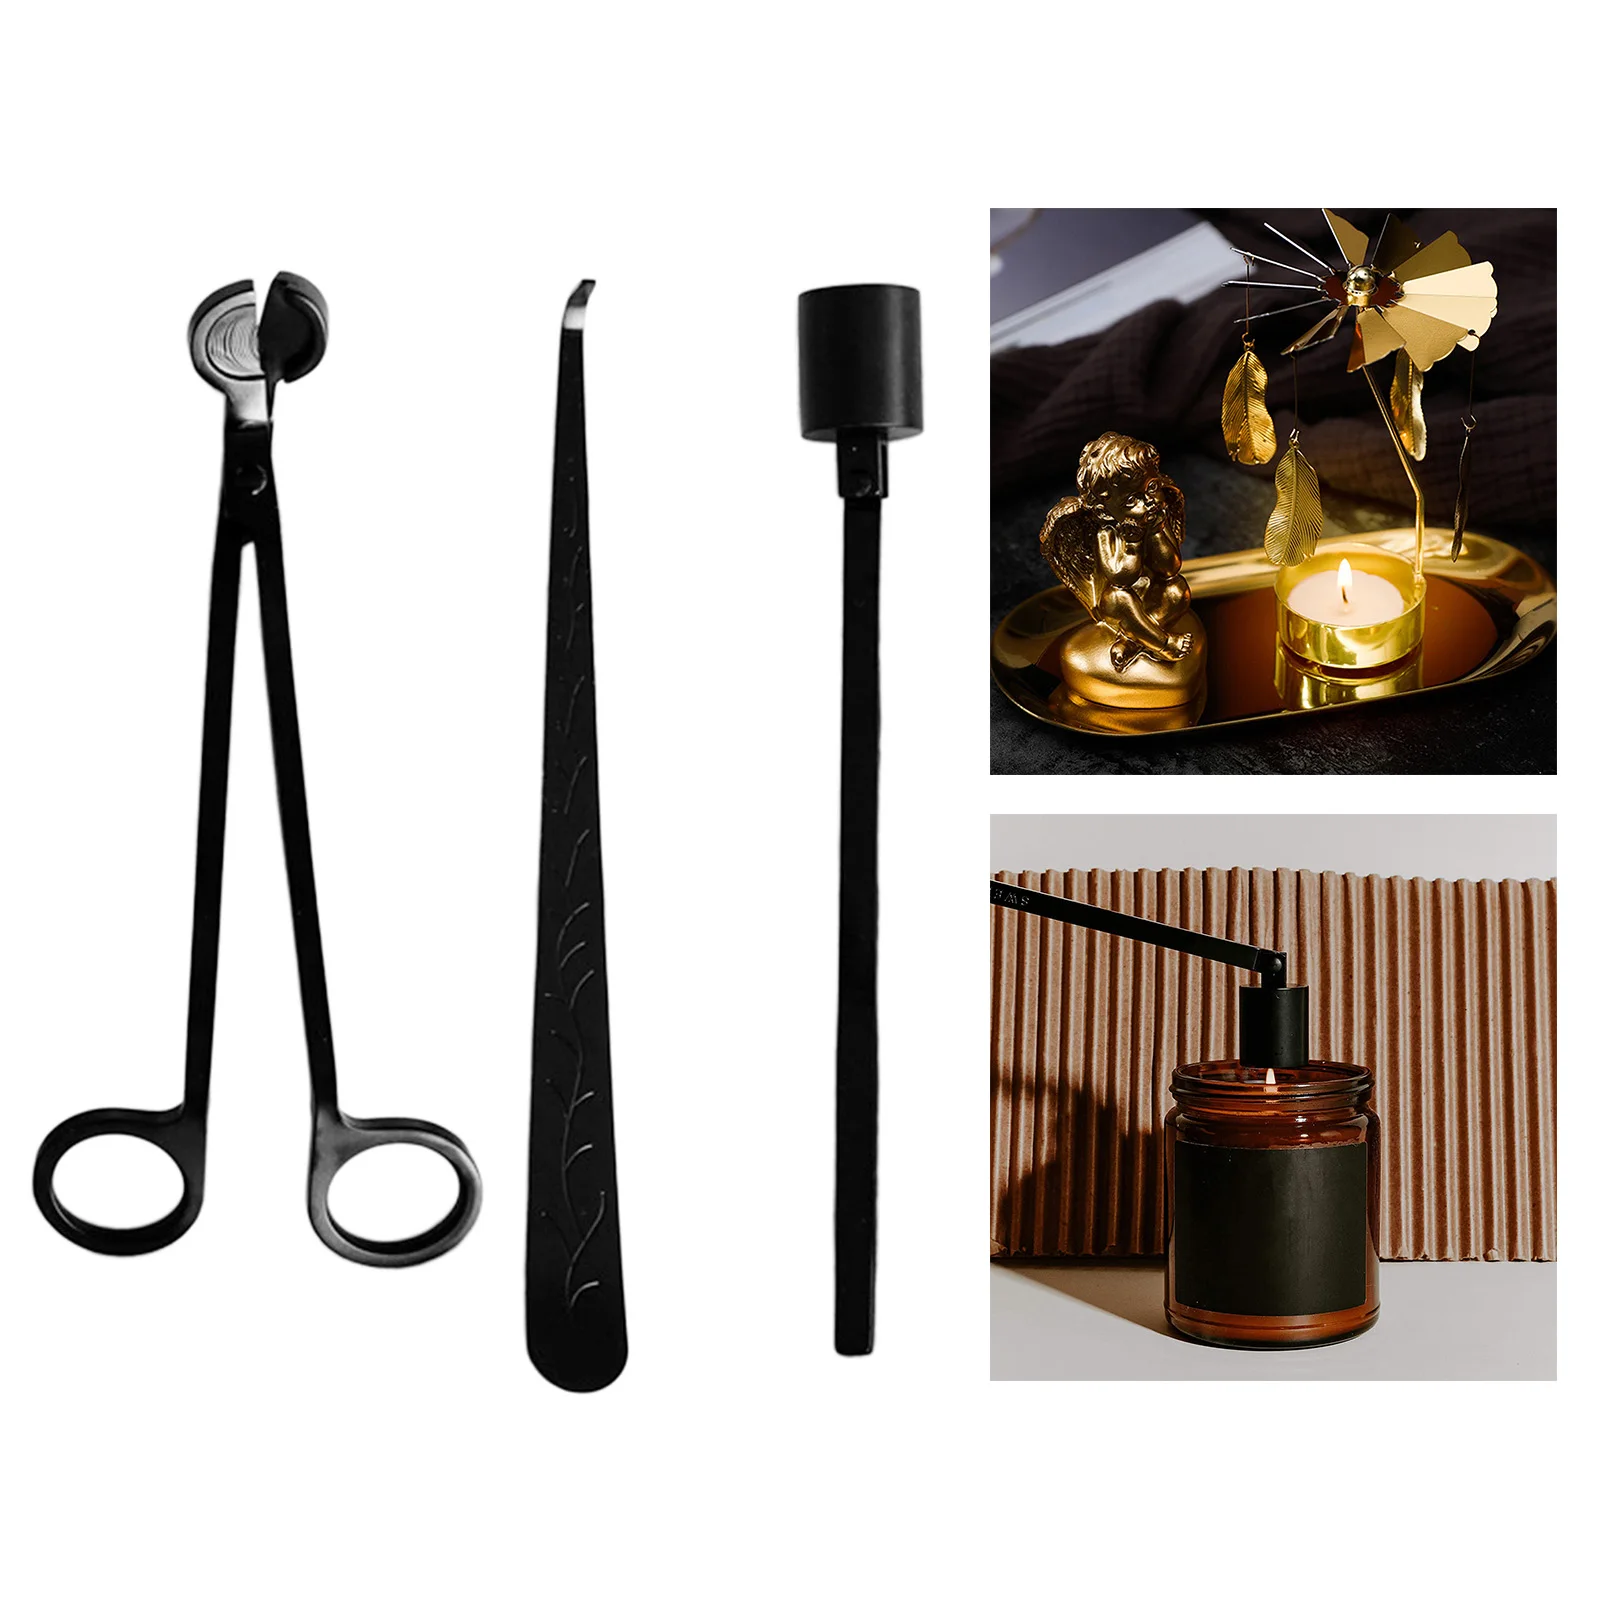 3Pcs/Set Black Candle Wick Trimmer Snuffer Dipper Candlewick Oil Lamp Cutter Hook Extinguish Tool Kit Accessory